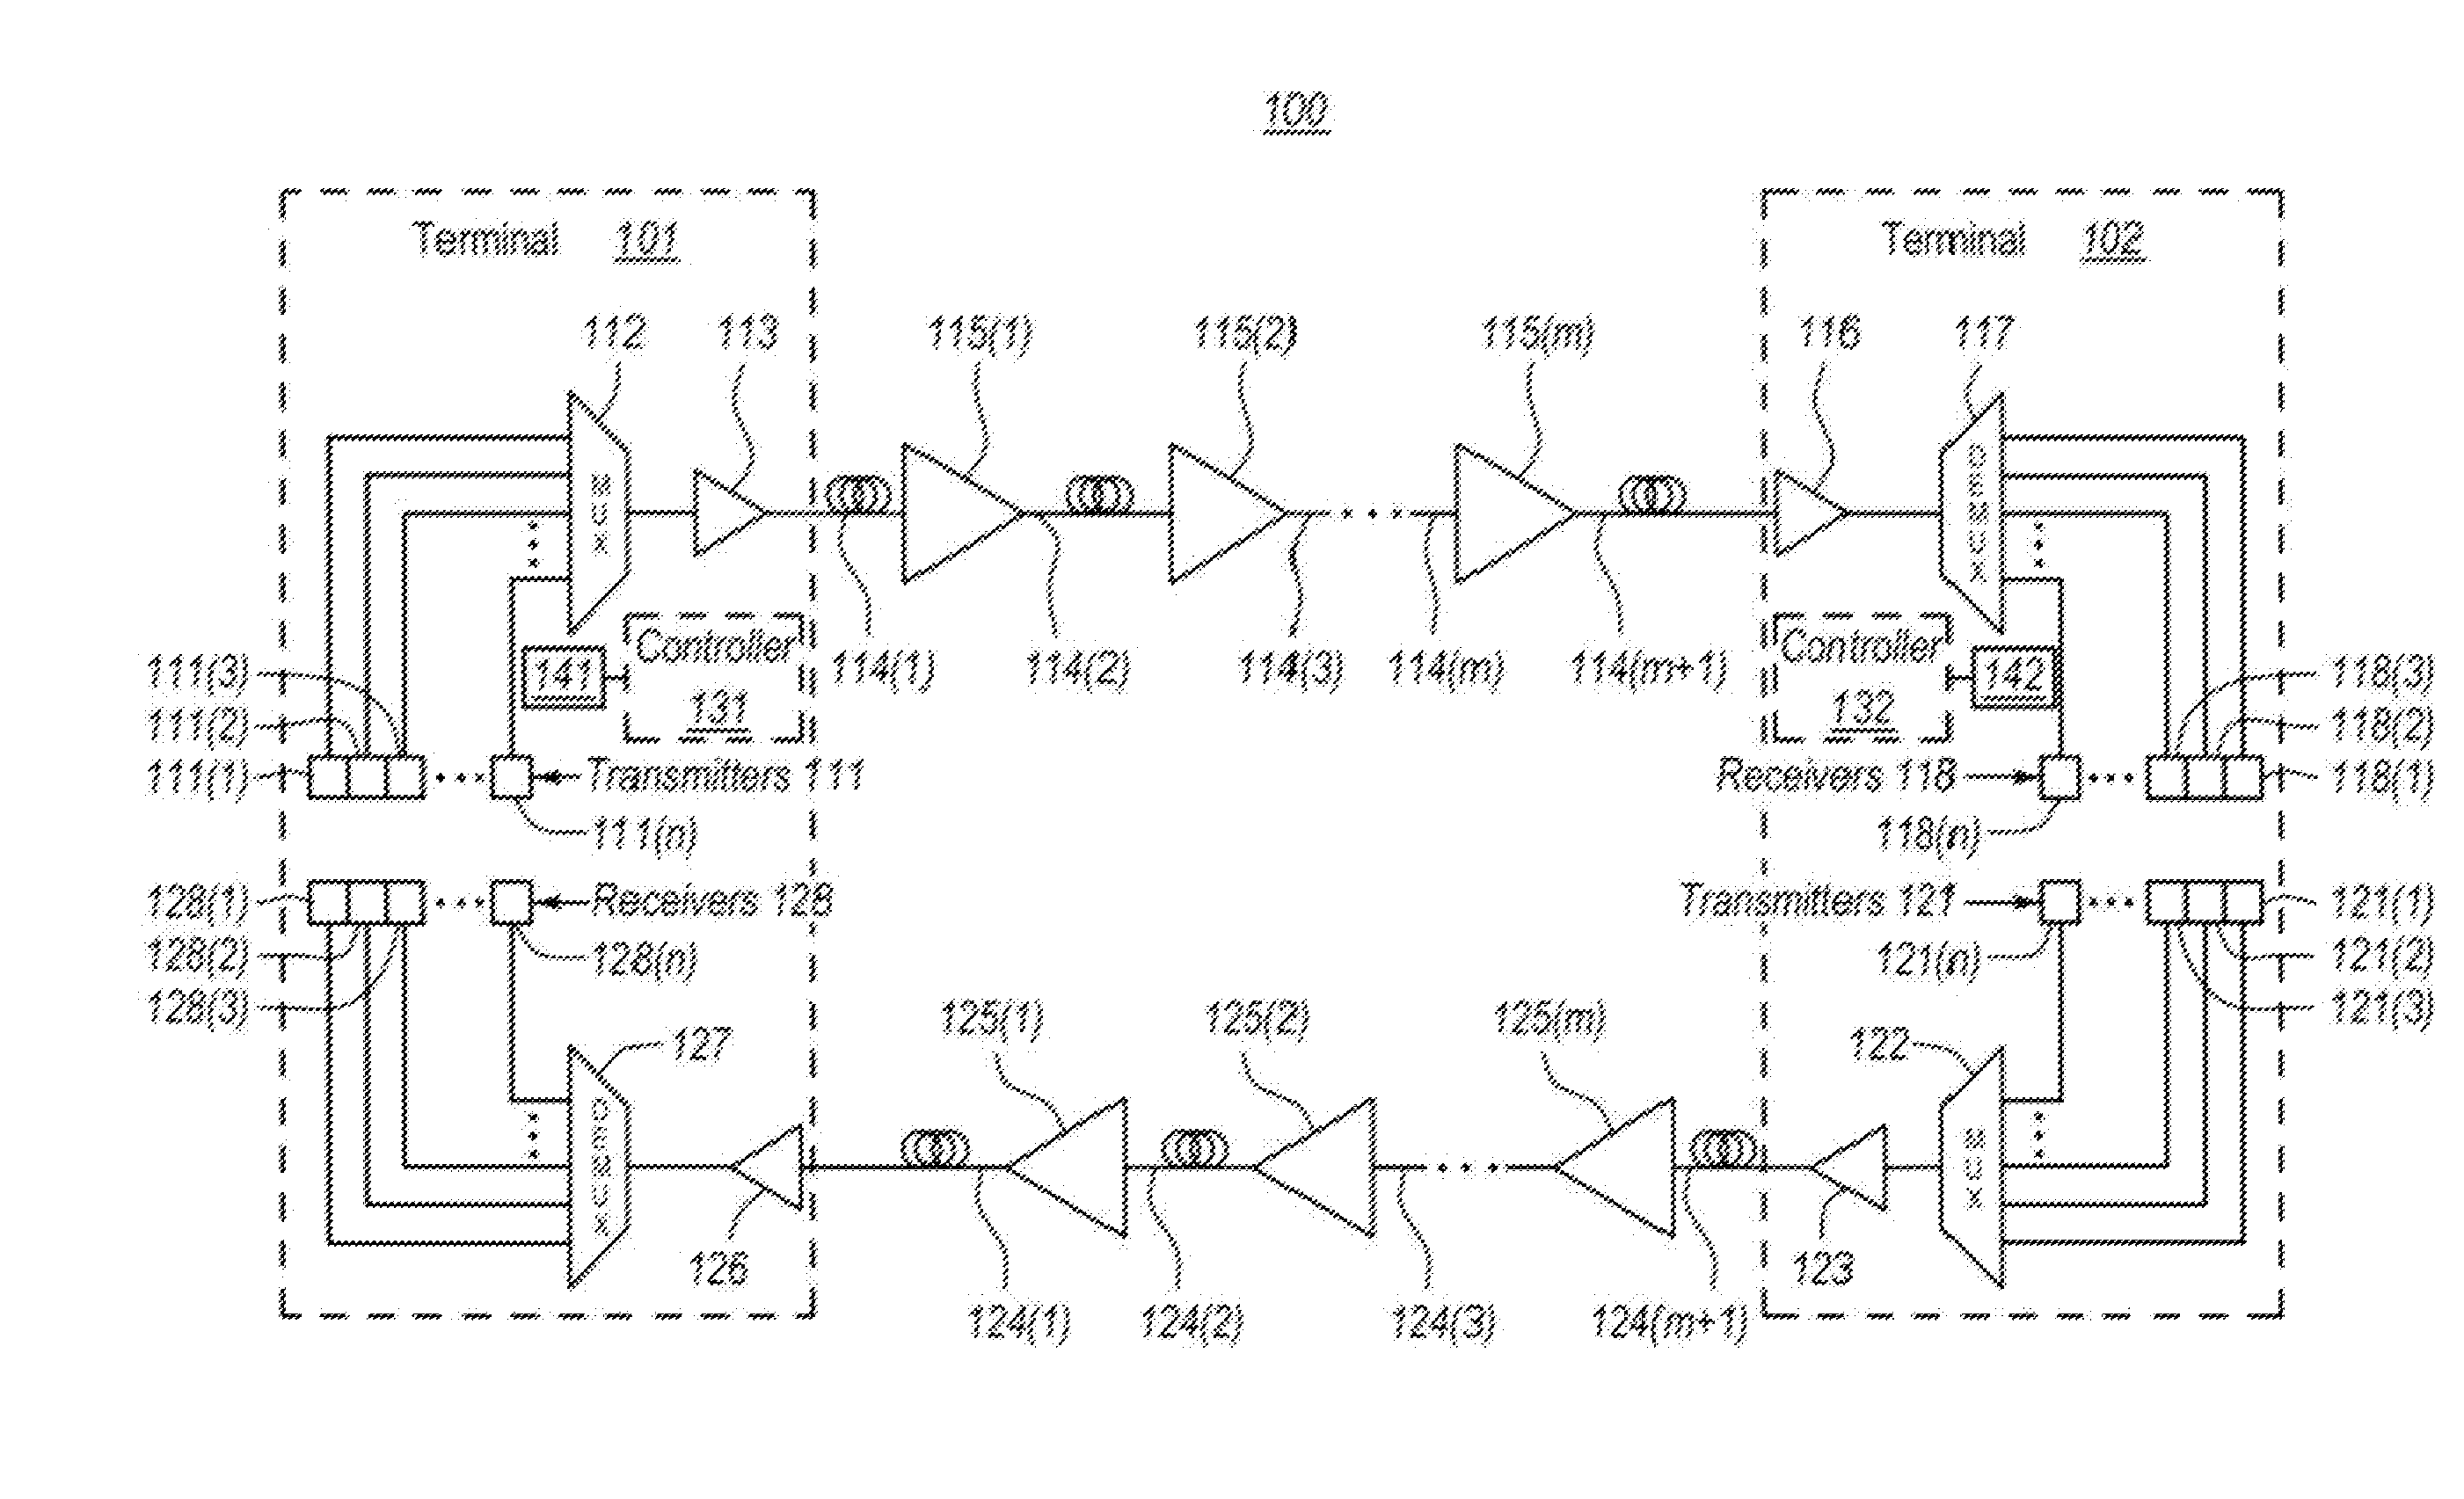 System control of repeatered optical communications system